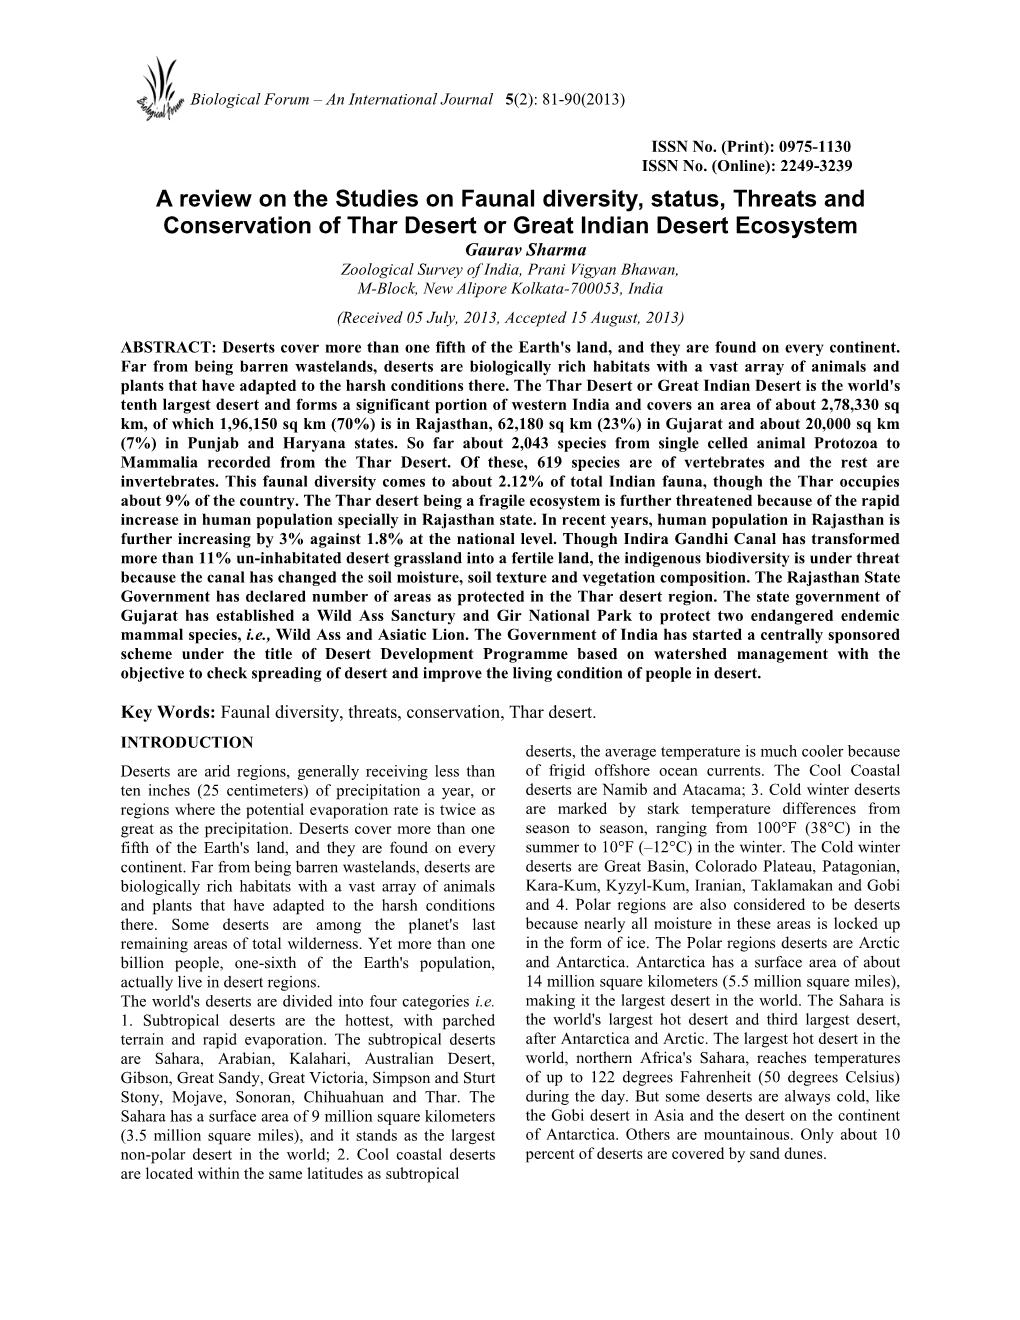 A Review on the Studies on Faunal Diversity, Status, Threats And